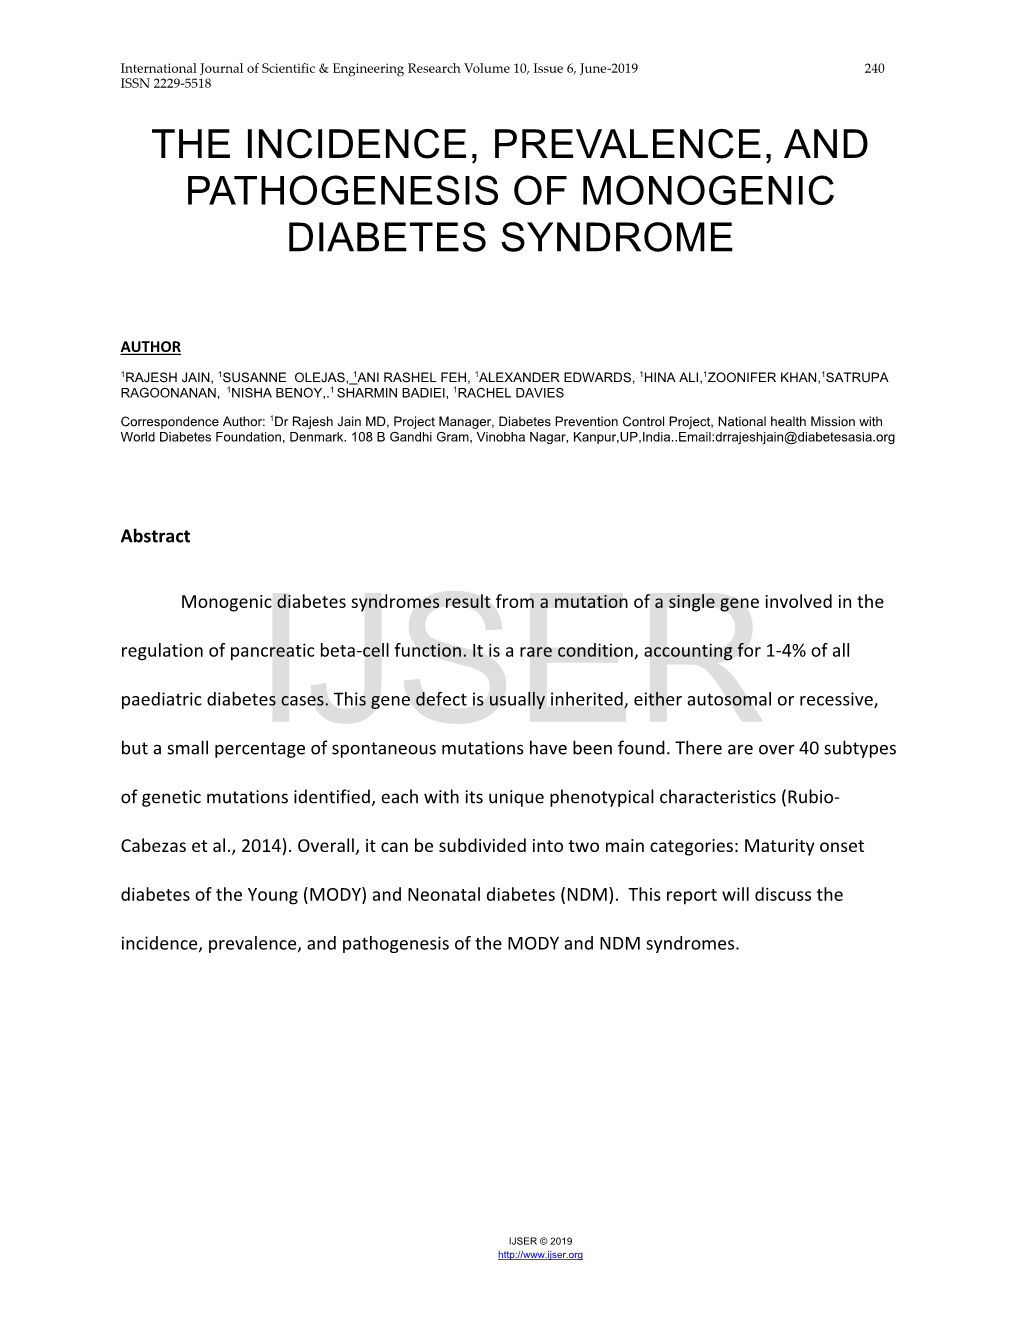 The Incidence, Prevalence, and Pathogenesis of Monogenic Diabetes Syndrome